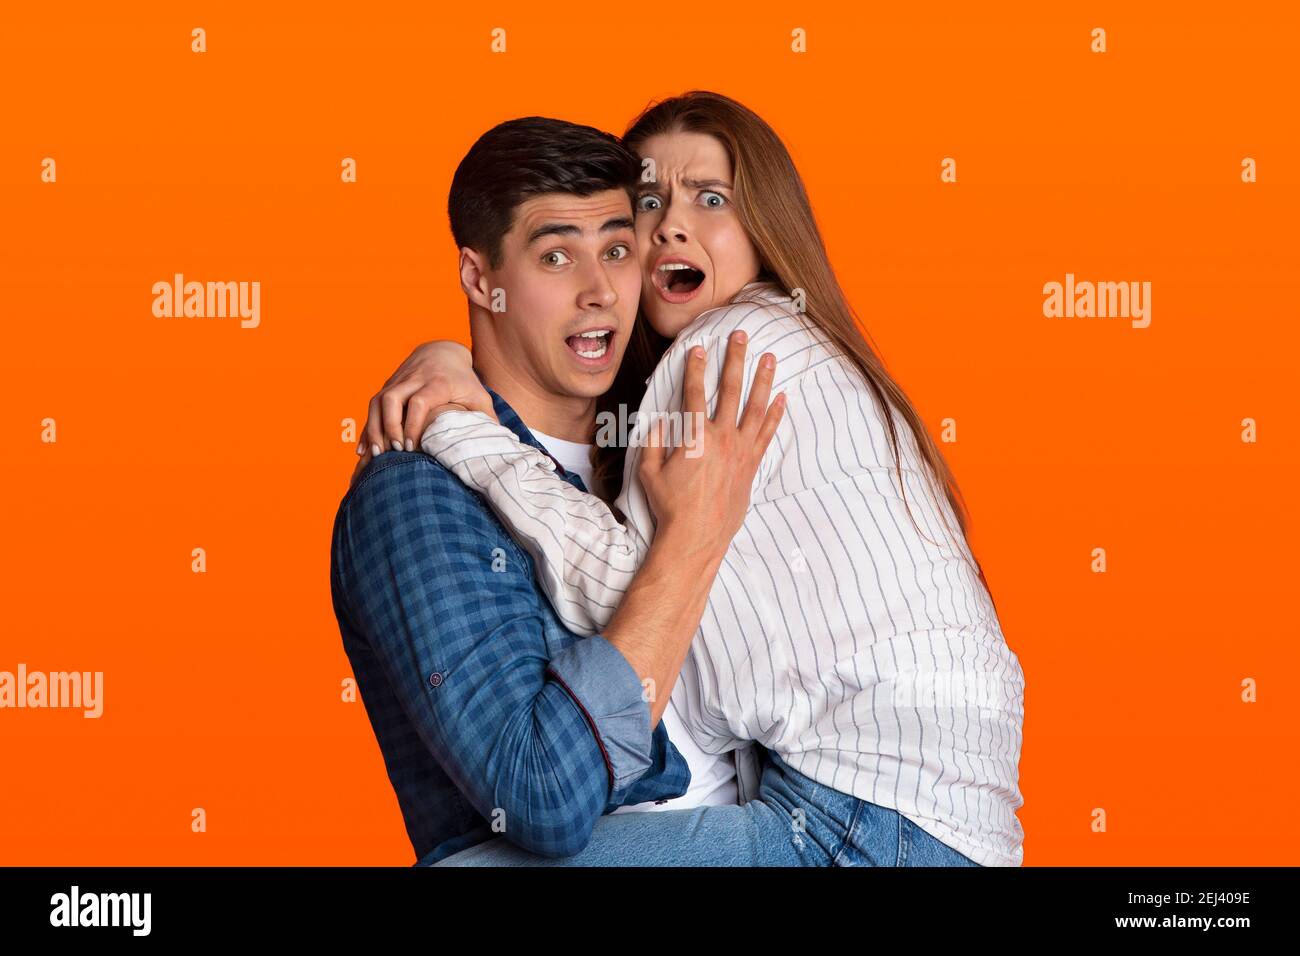 Fright excited scared millennial zoomers woman with open mouth afraid and screams Stock Photo